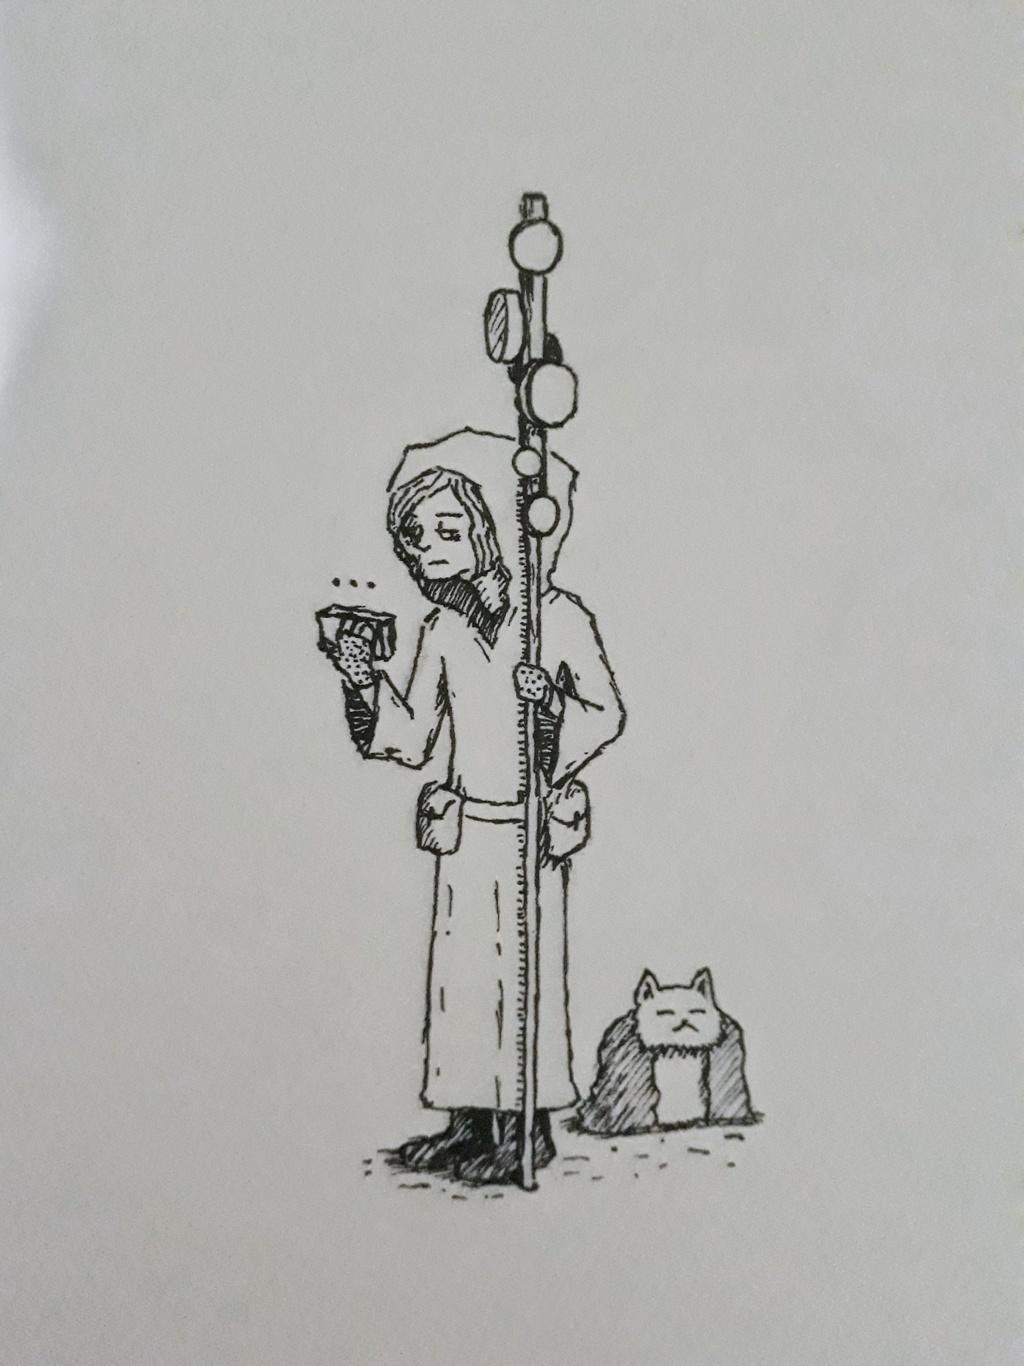 a drawing of a person holding an antenna staff; there's also a cat with a blanket